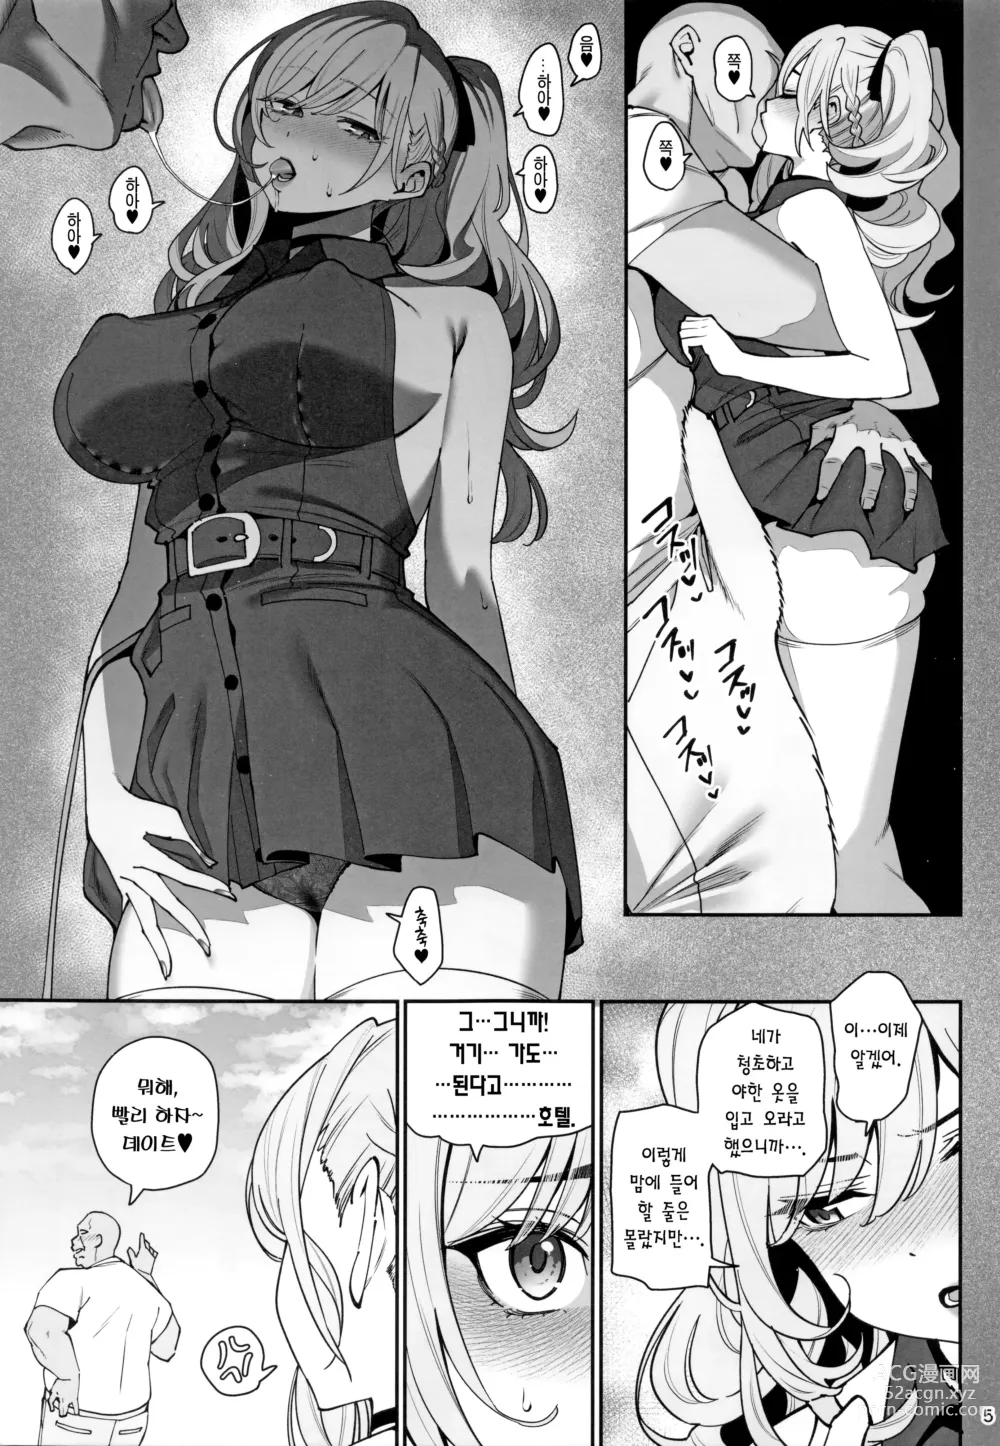 Page 6 of doujinshi 여친 최면2